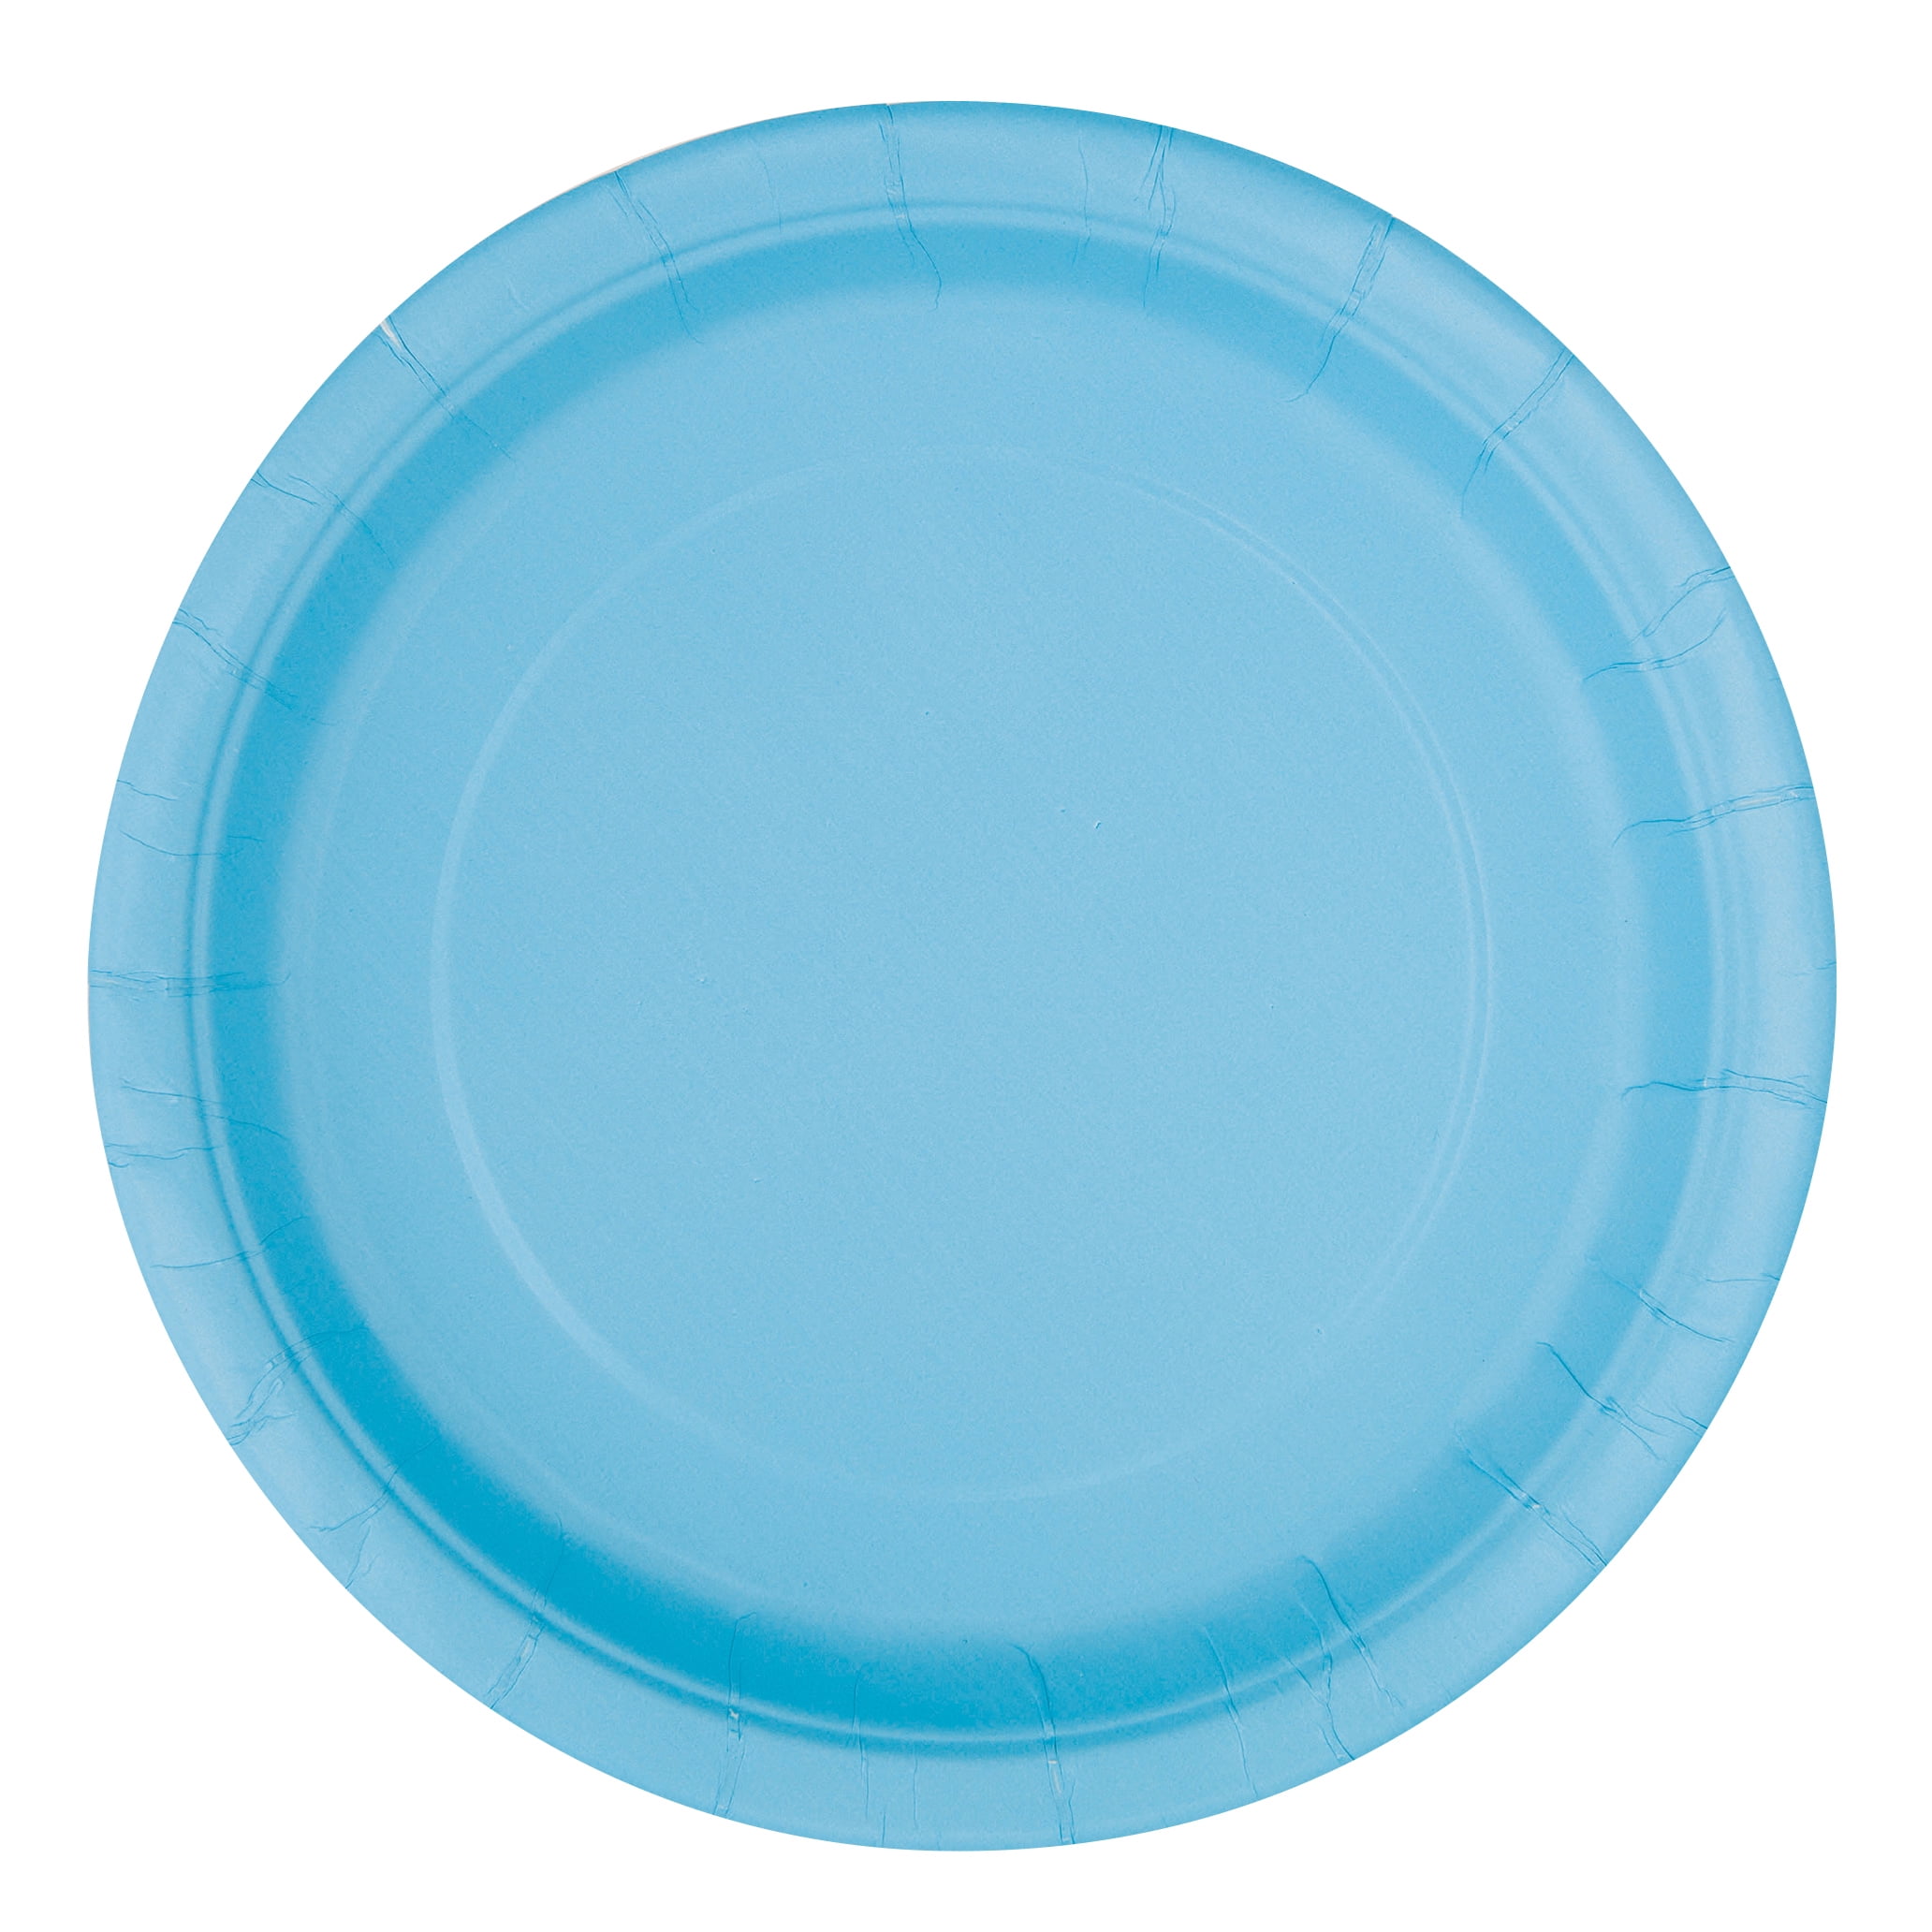 American Greetings Pokemon Party Supplies Blue Paper Dessert Plates, 7 x  7, 40-Count 